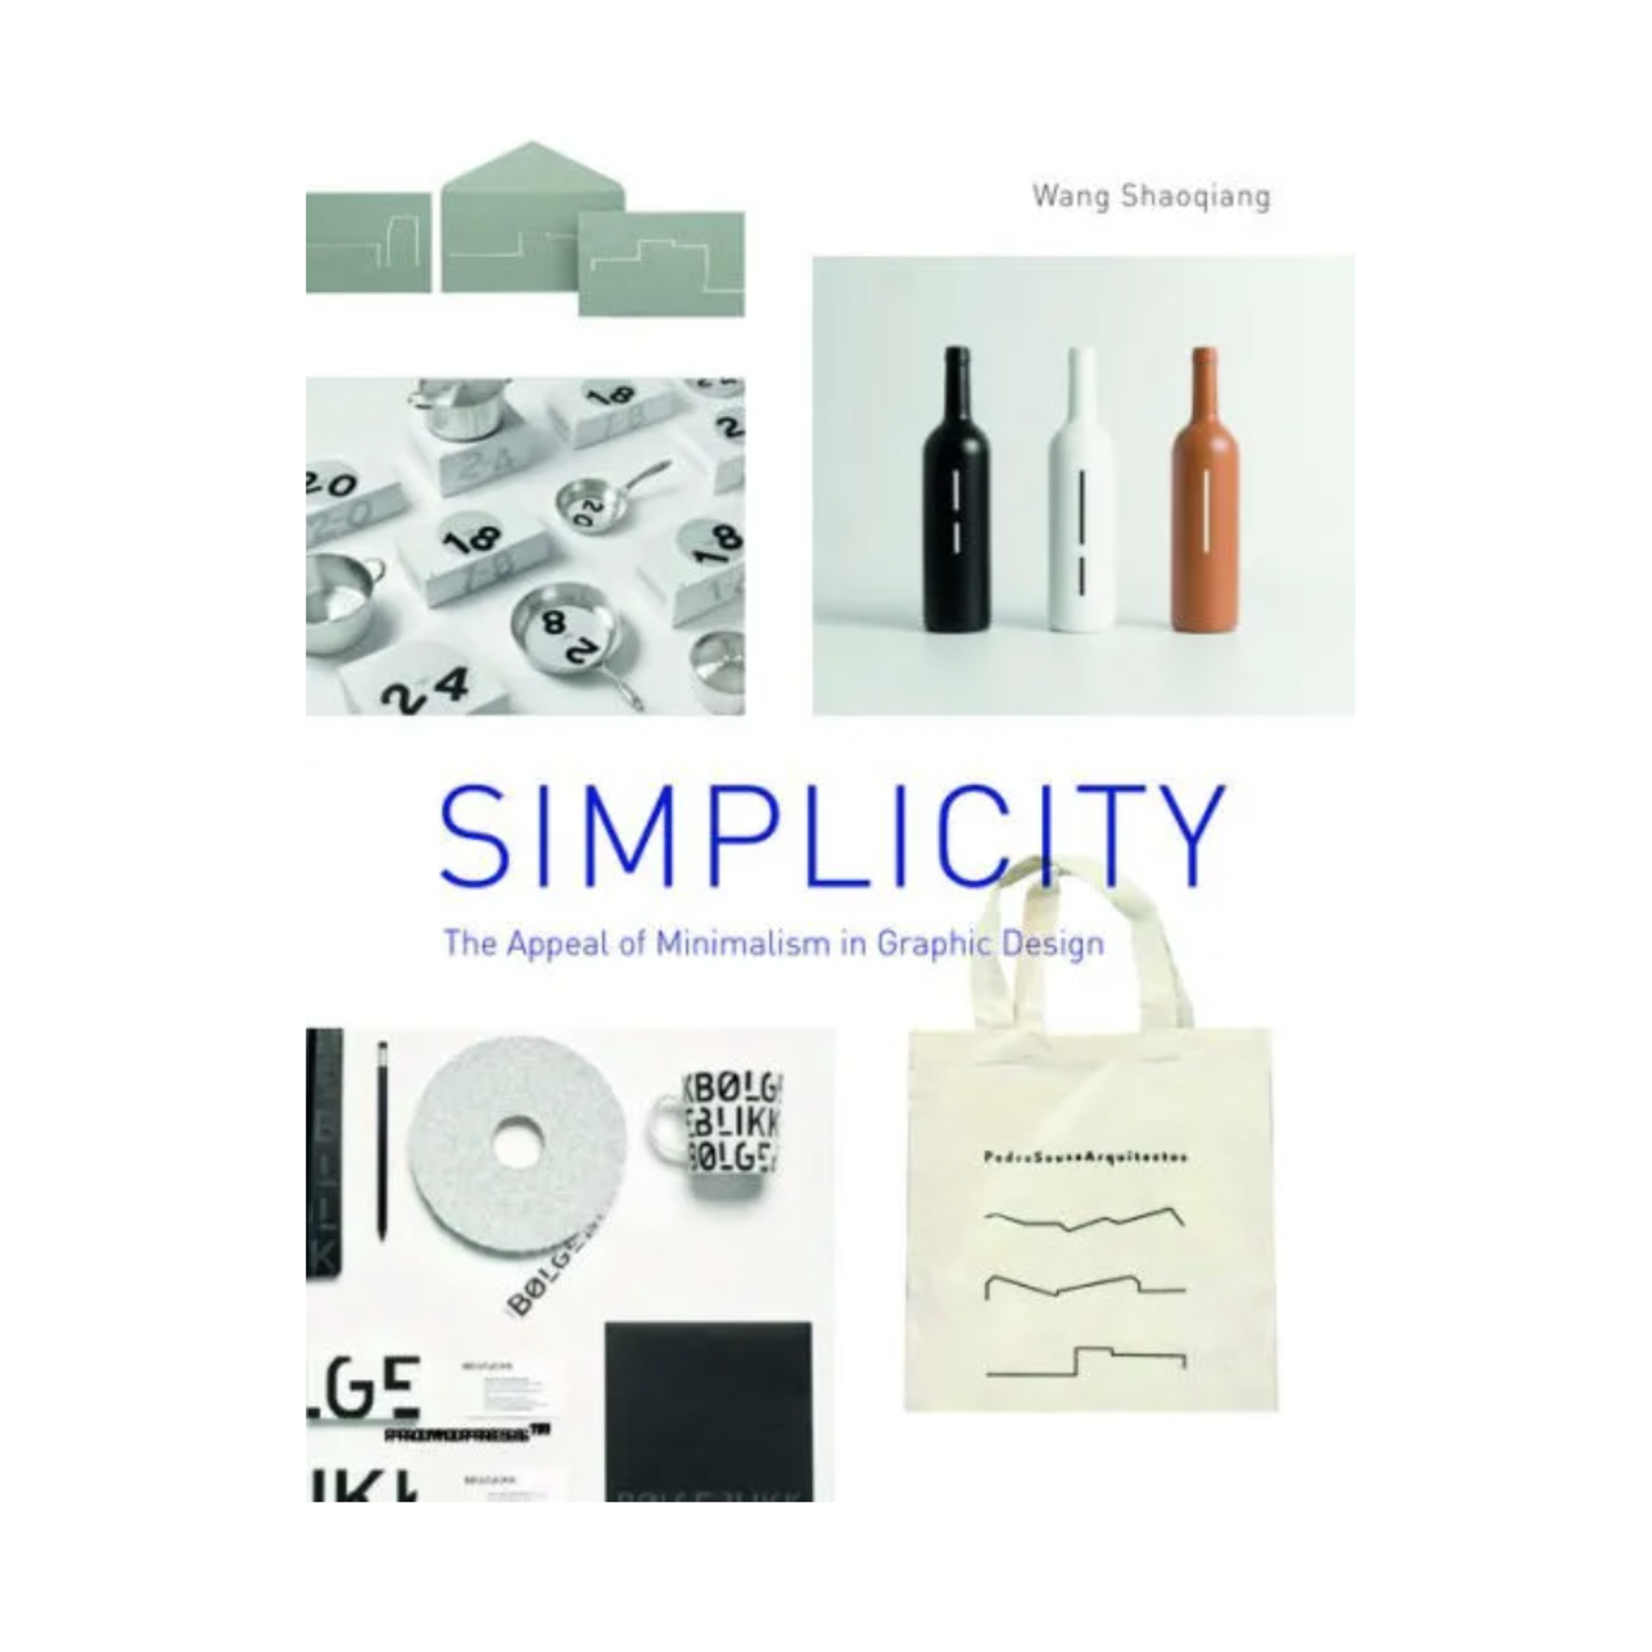 Simplicity: The Appeal of Minimalism in Graphic Design